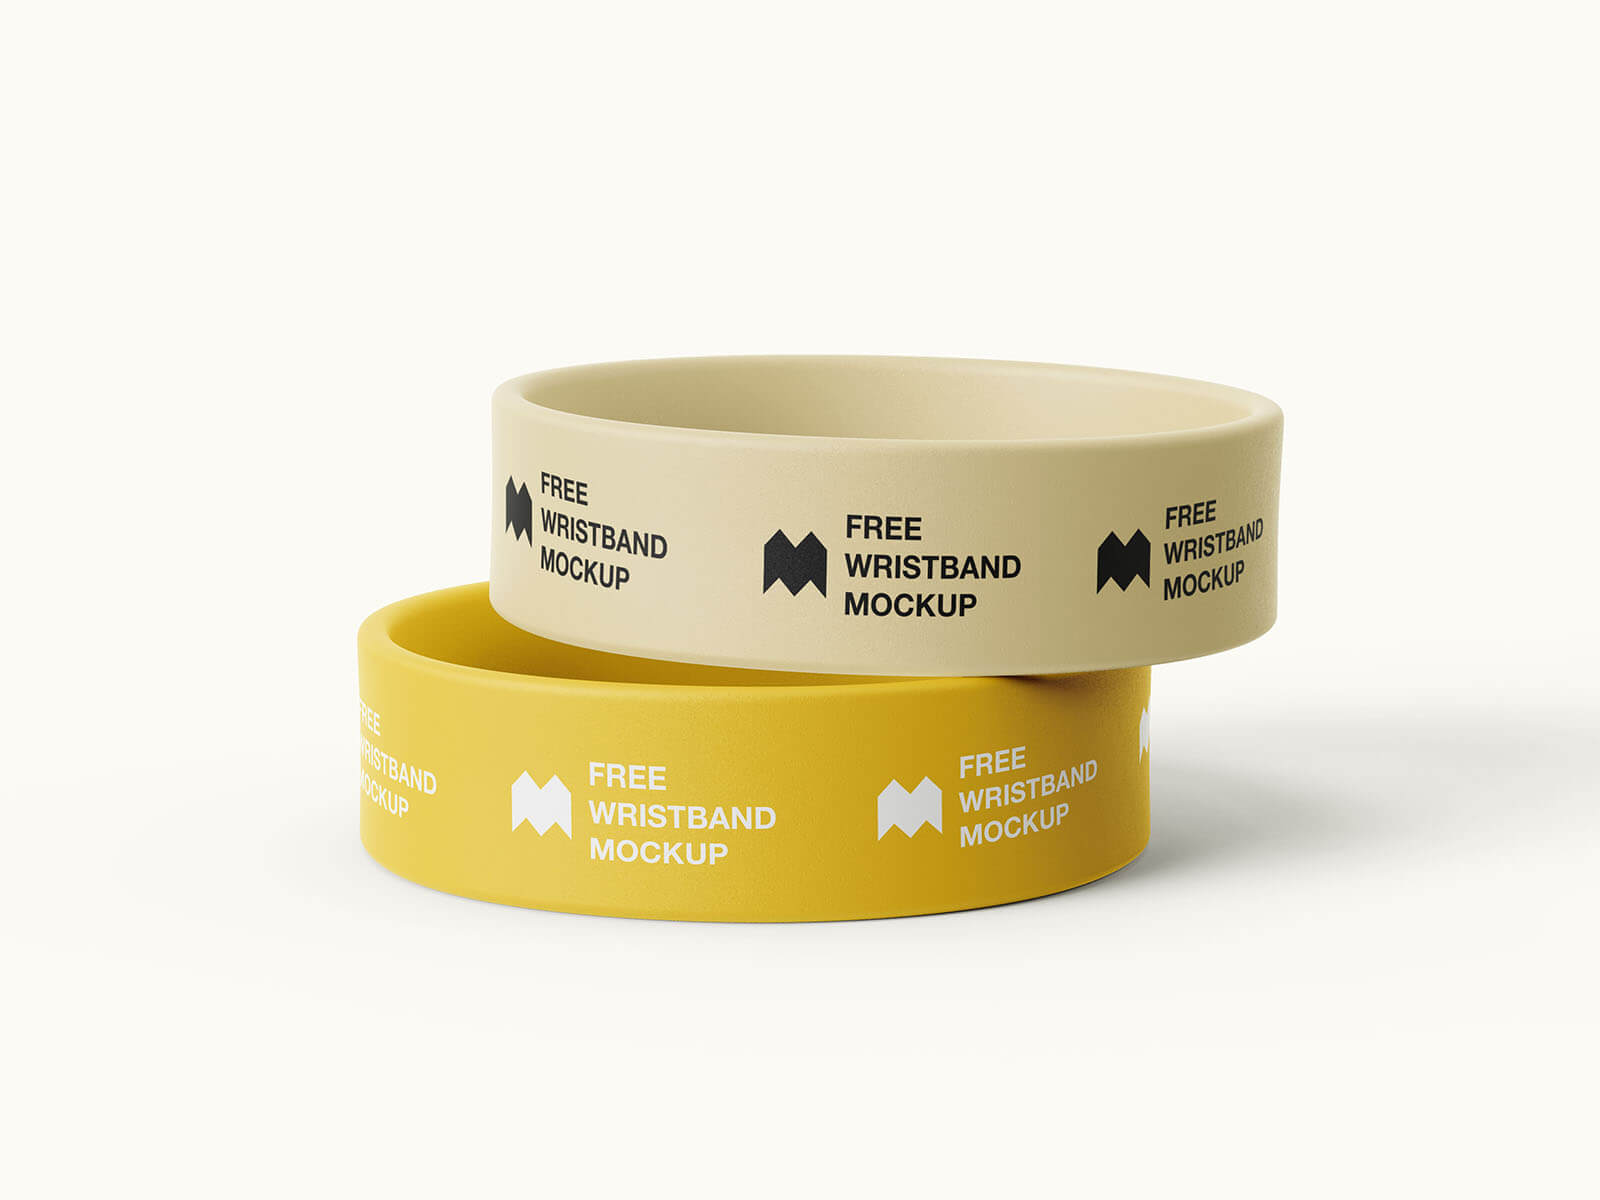 6 Free Wide Silicone Wristbands / Rubber Bracelet Mockup PSD Files